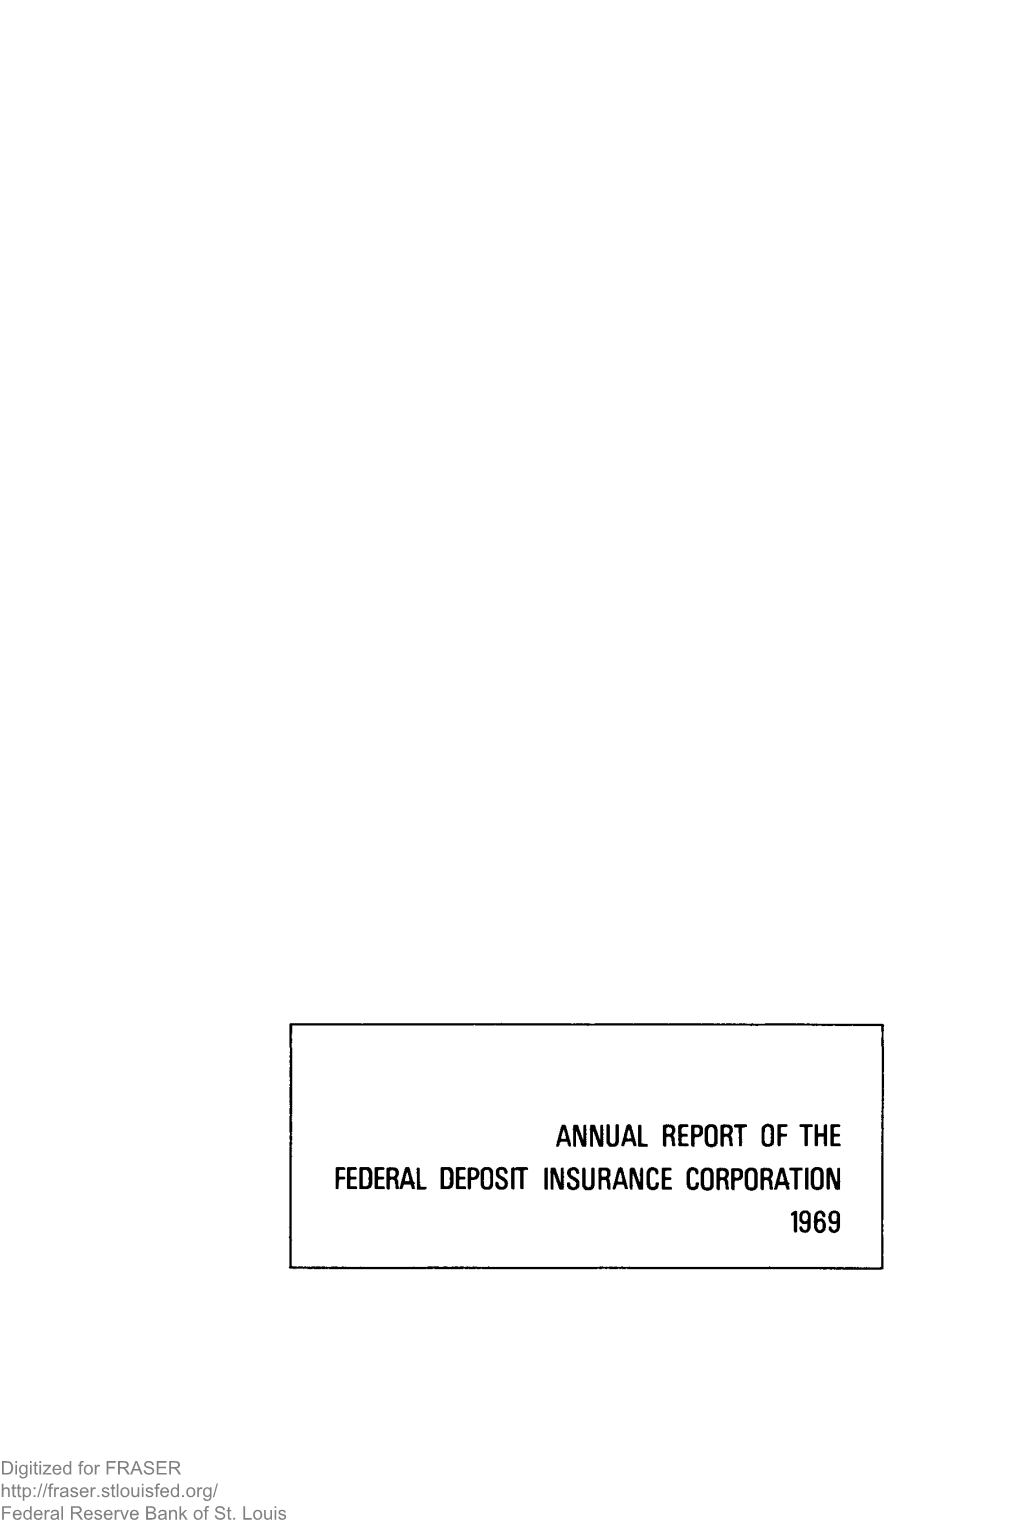 Annual Report of the Federal Deposit Insurance Corporation 1969